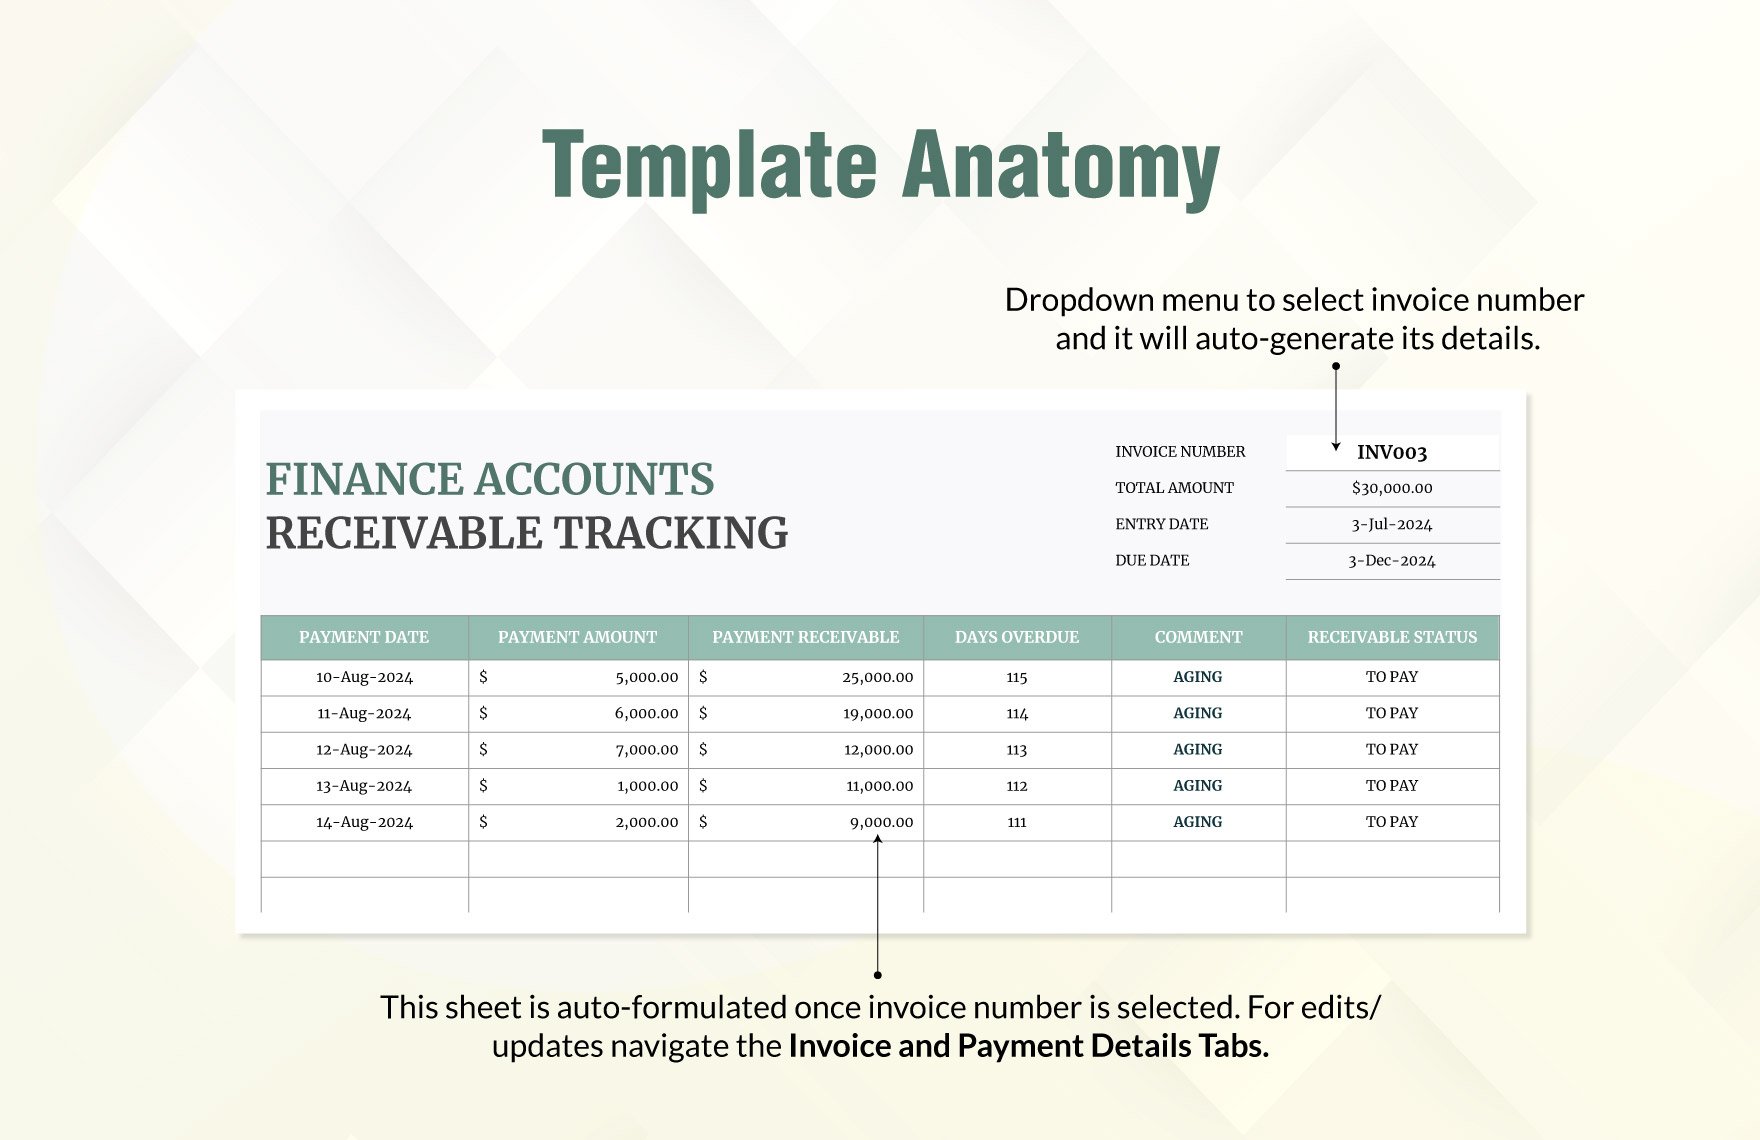 Finance Accounts Receivable Tracking Template